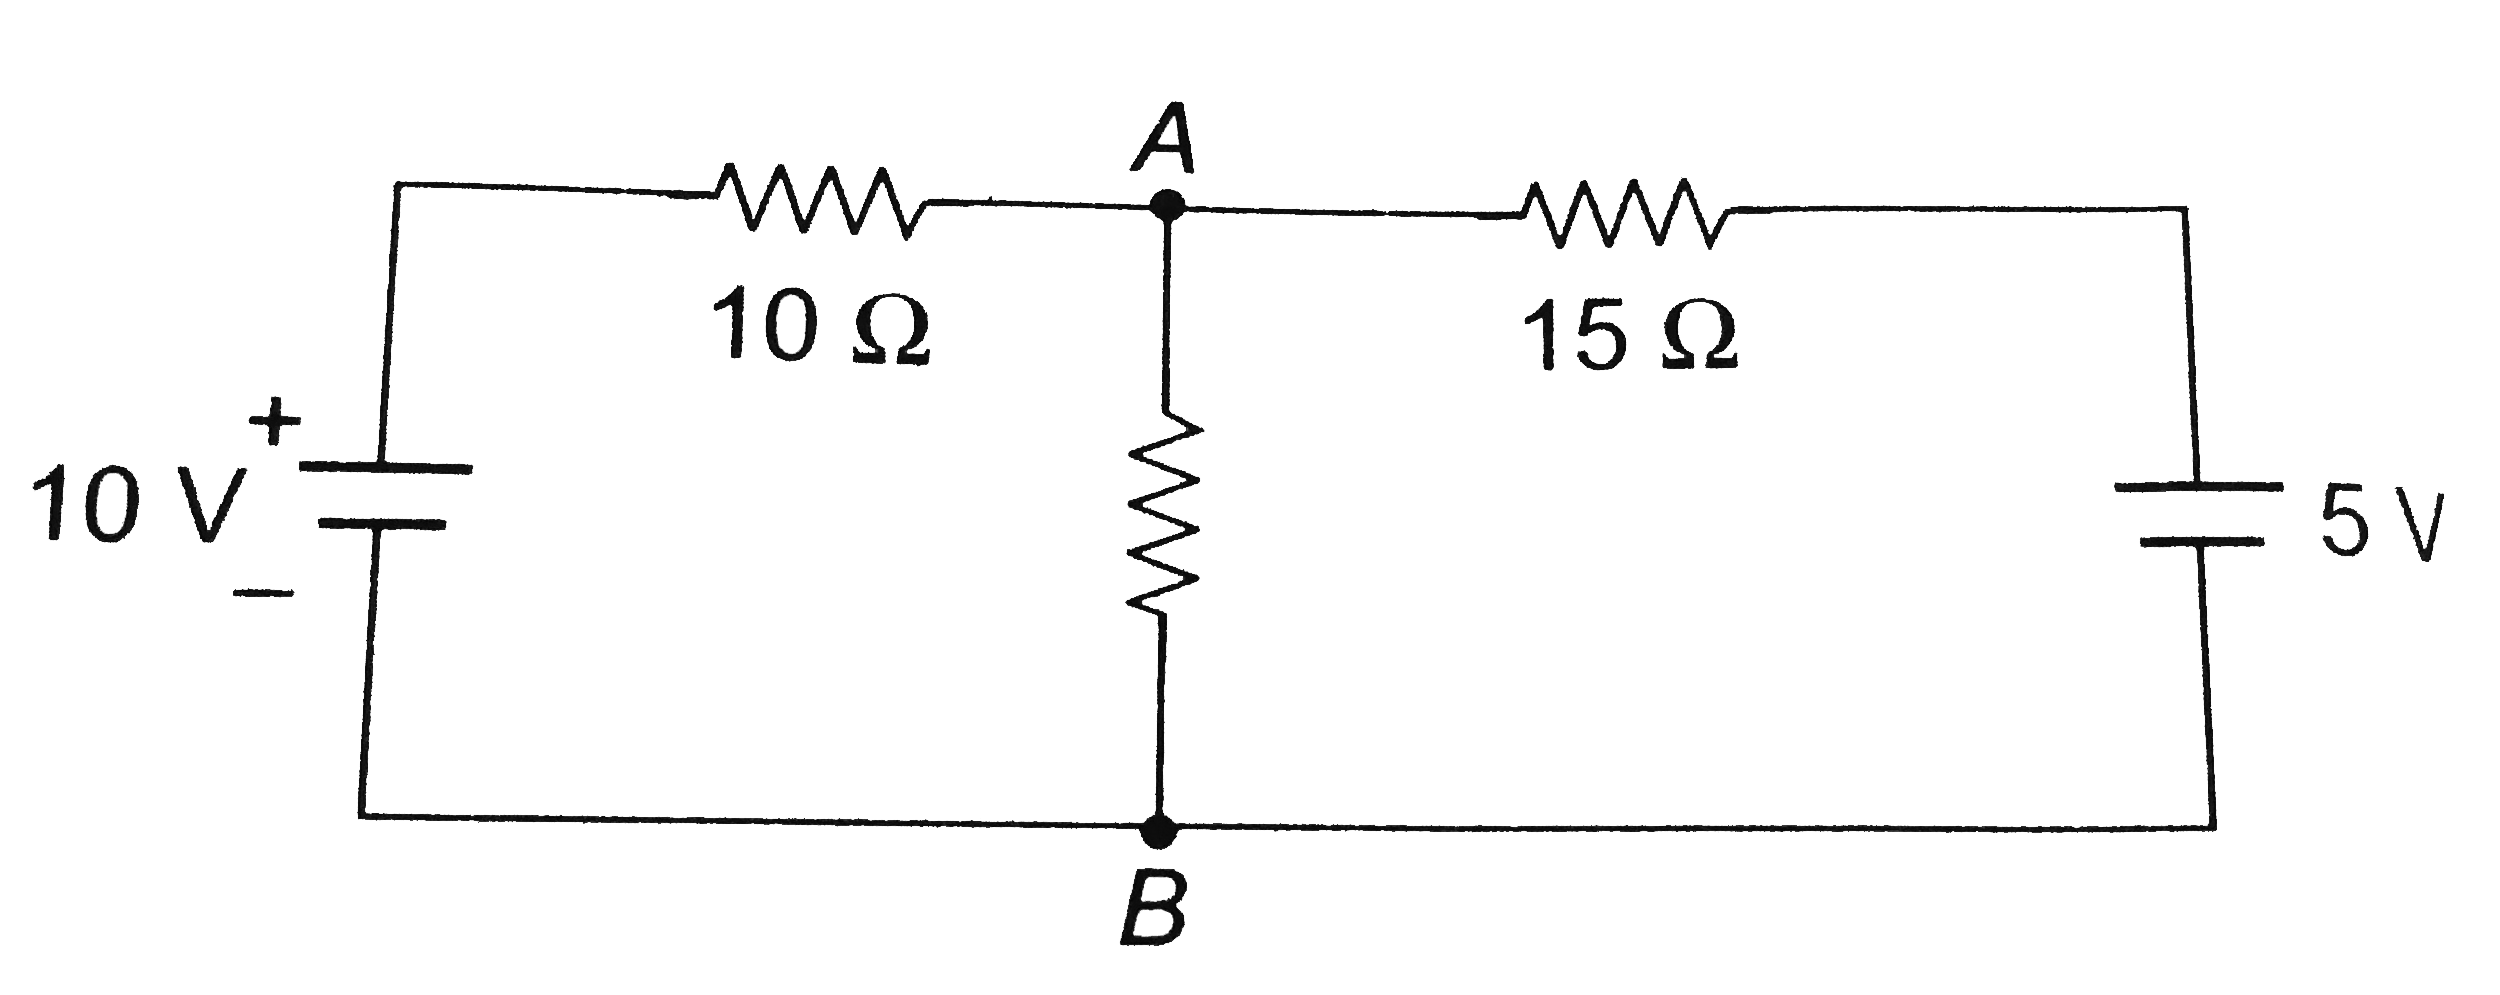 A circuit is arranged as shown. Then, the current from A to B is